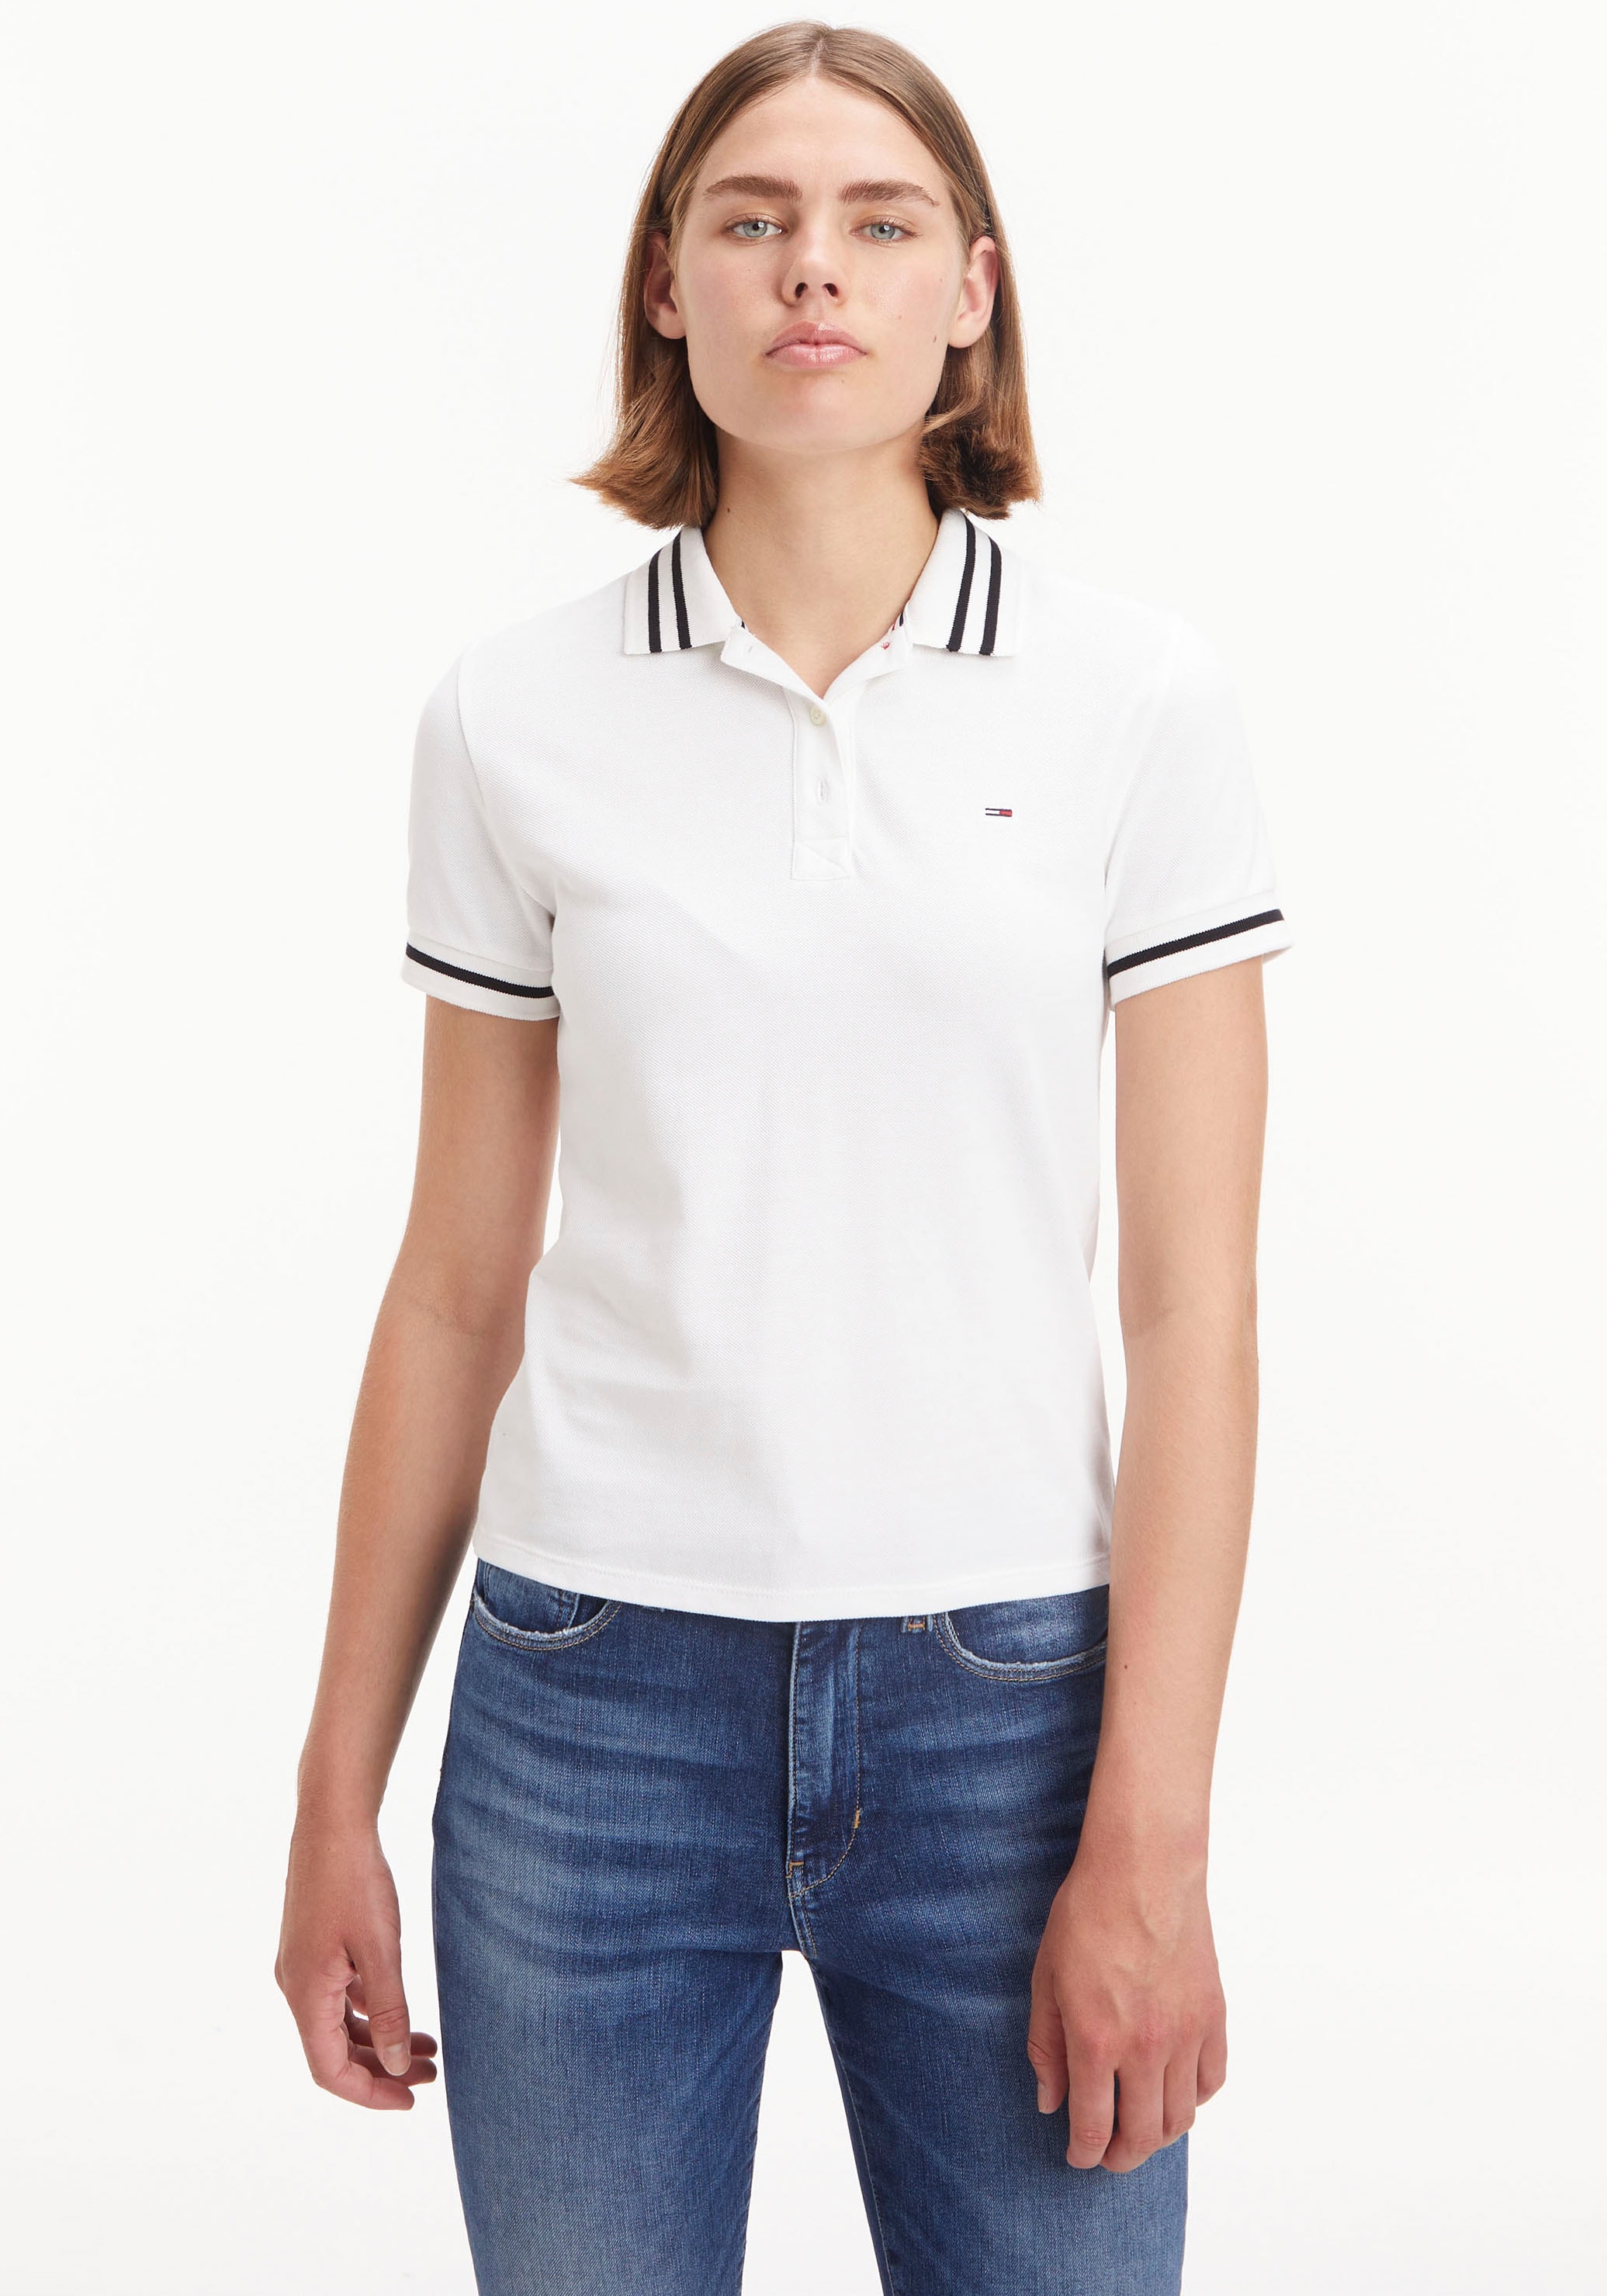 Tommy Jeans Kontraststreifen Jeans walking ESSENTIAL Tommy mit POLO«, TIPPING | I\'m »TJW Poloshirt Label-Flag shoppen 